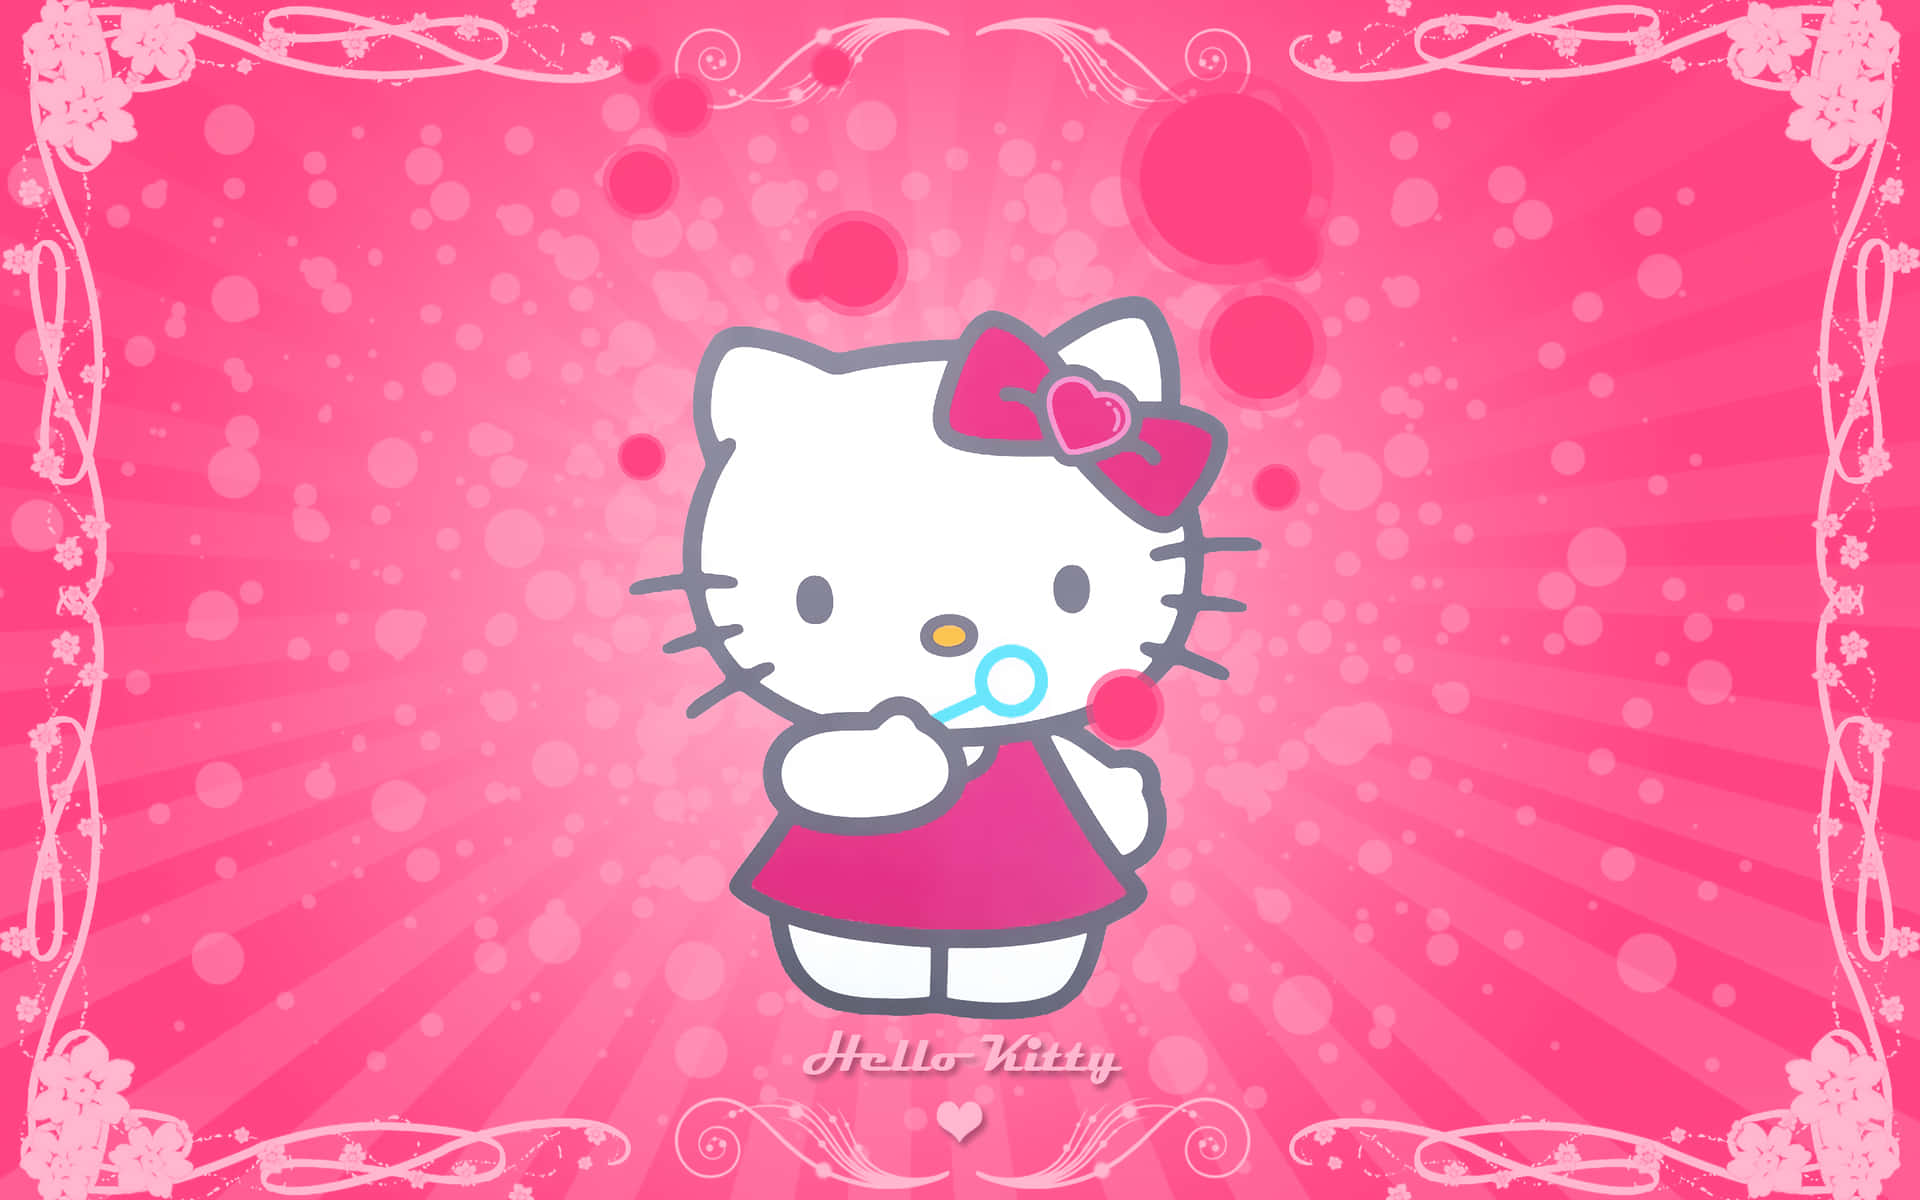 "Upgrade Your Computer with the Fun and Fabulous Hello Kitty Laptop!" Wallpaper